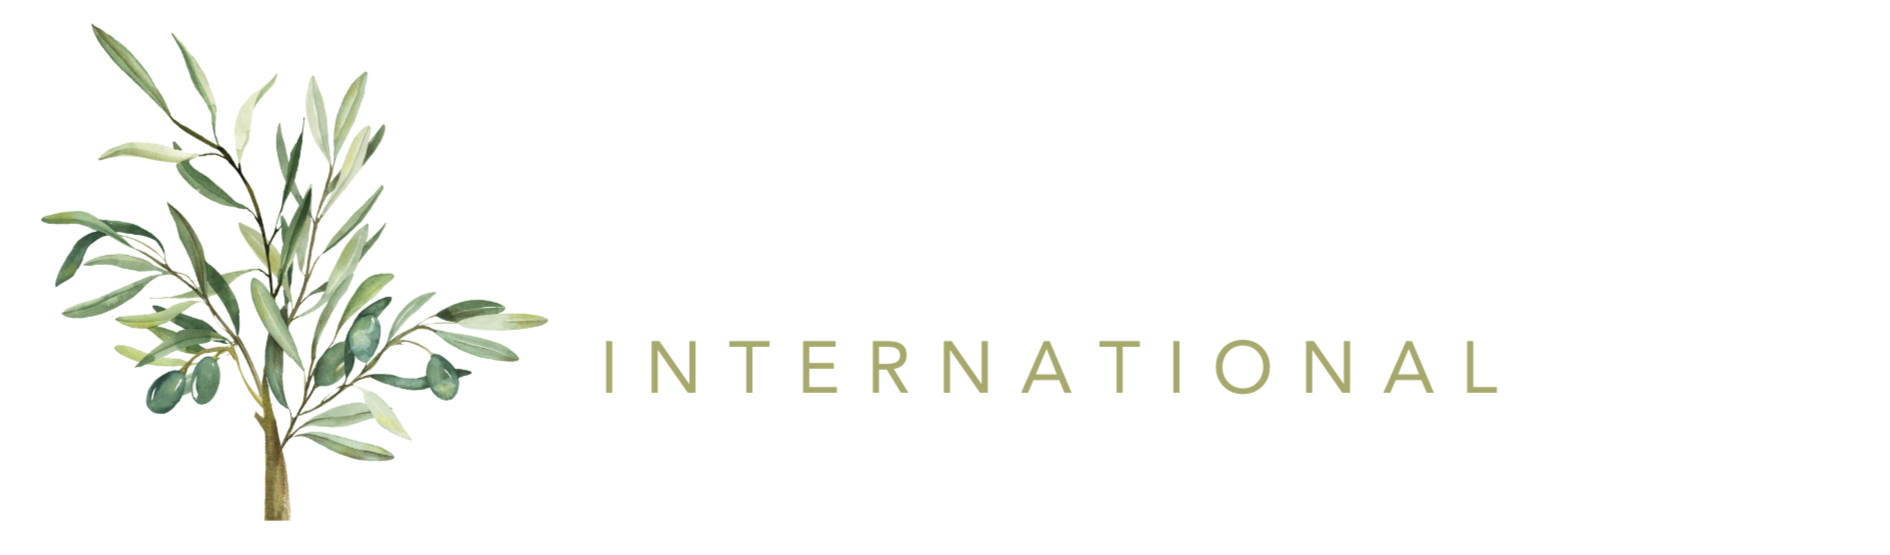 Olive Consulting International Logo with olive tree and white and gold font